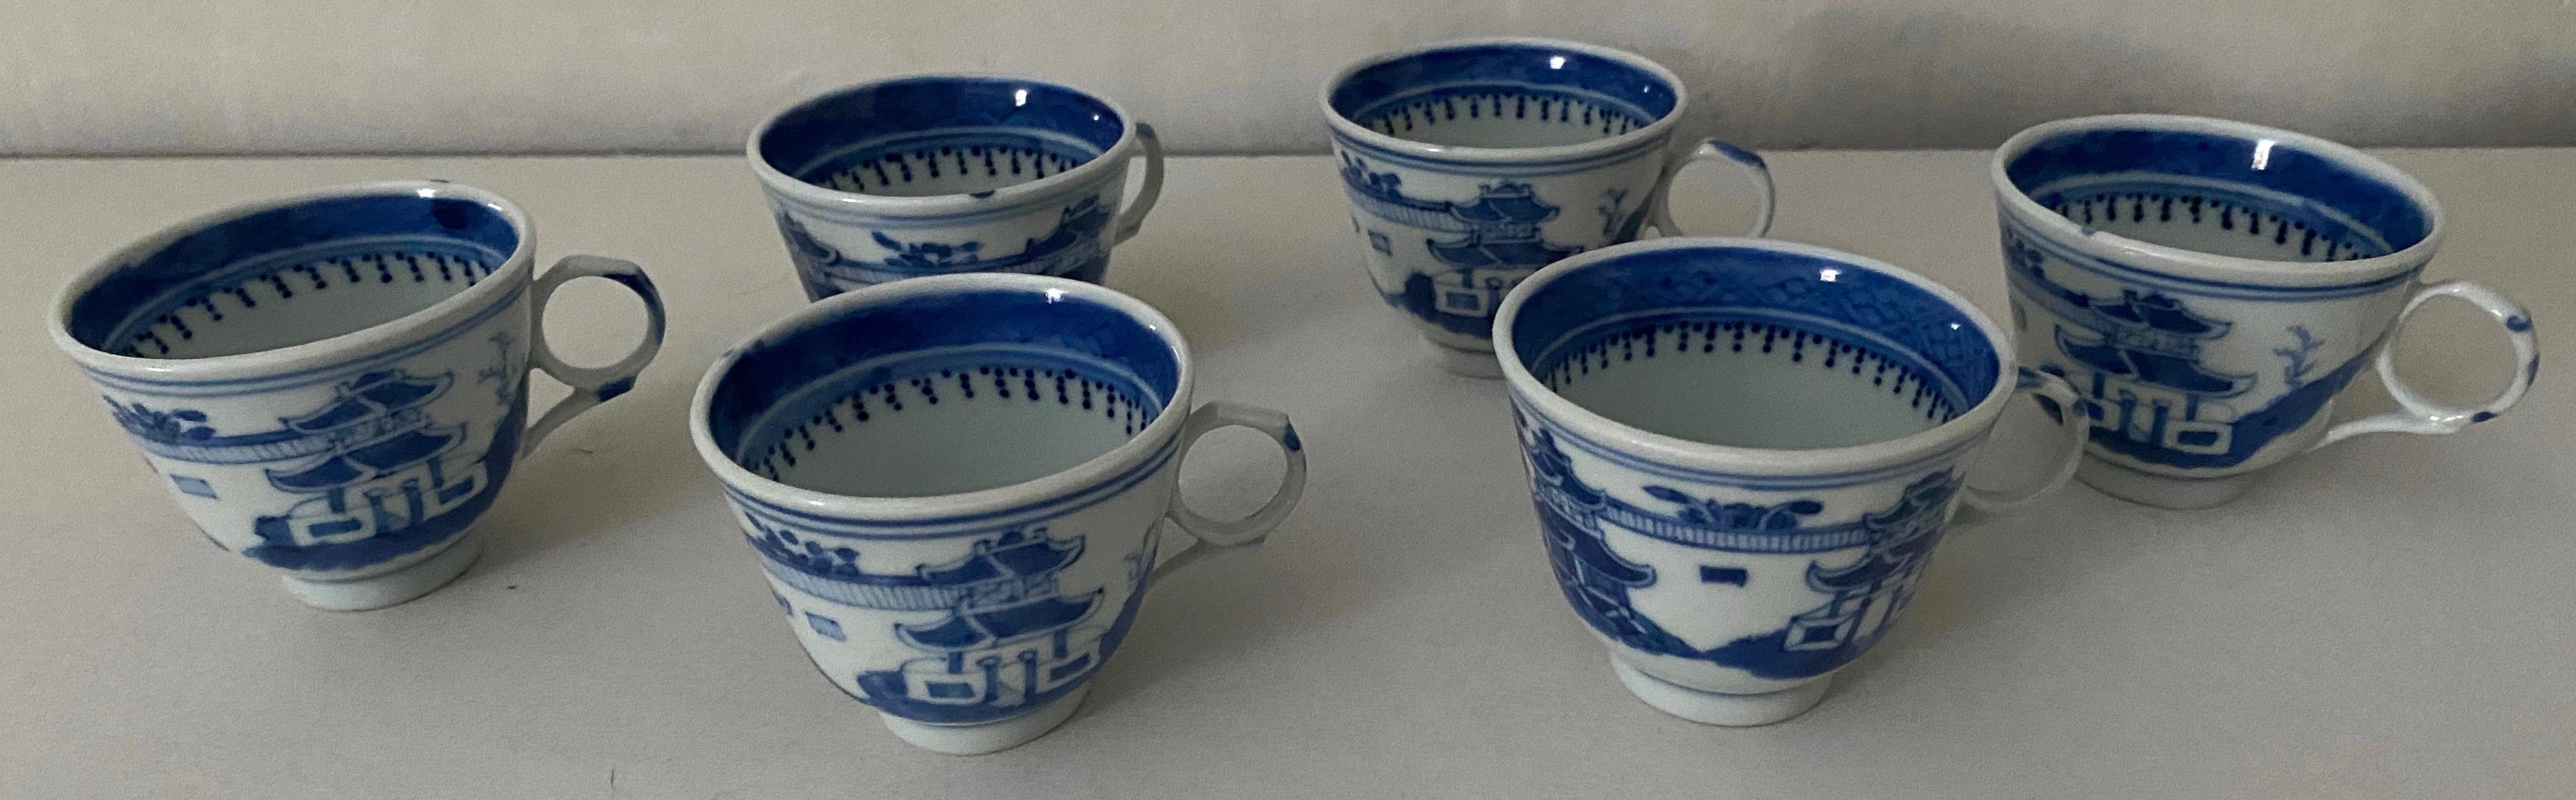 Drink tea in the traditional Chinese custom or add to your blue and white collection. This set of 6 blue and white cups are made of fine Chinese porcelain with hand painted decoration. The small volume of a small cup allows the tea to cool quickly